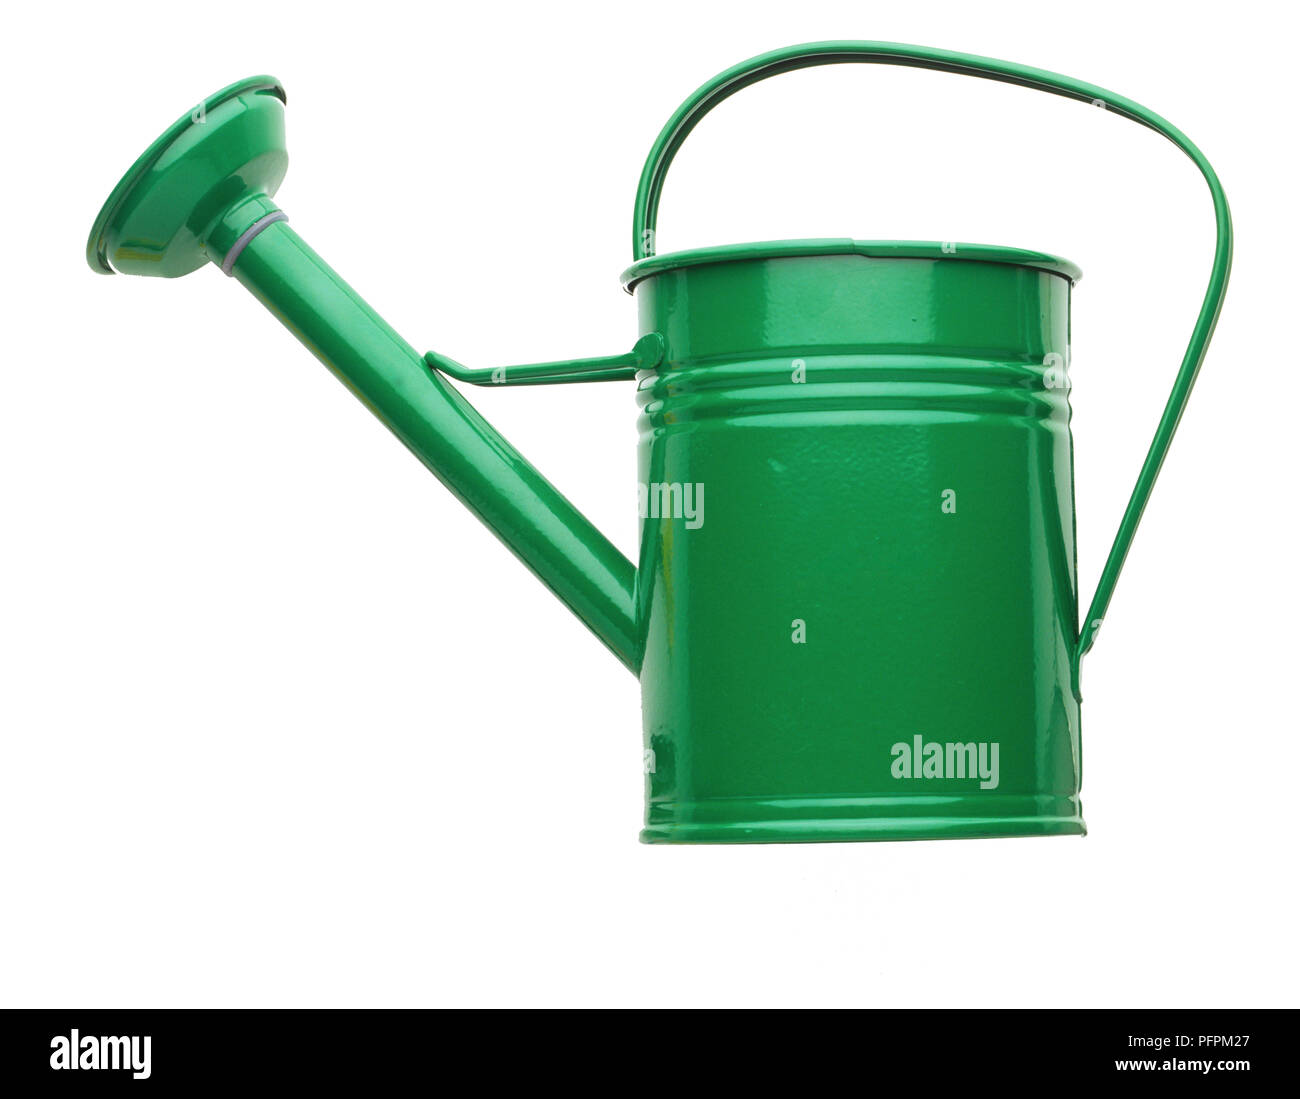 Green metal watering can, side view Stock Photo